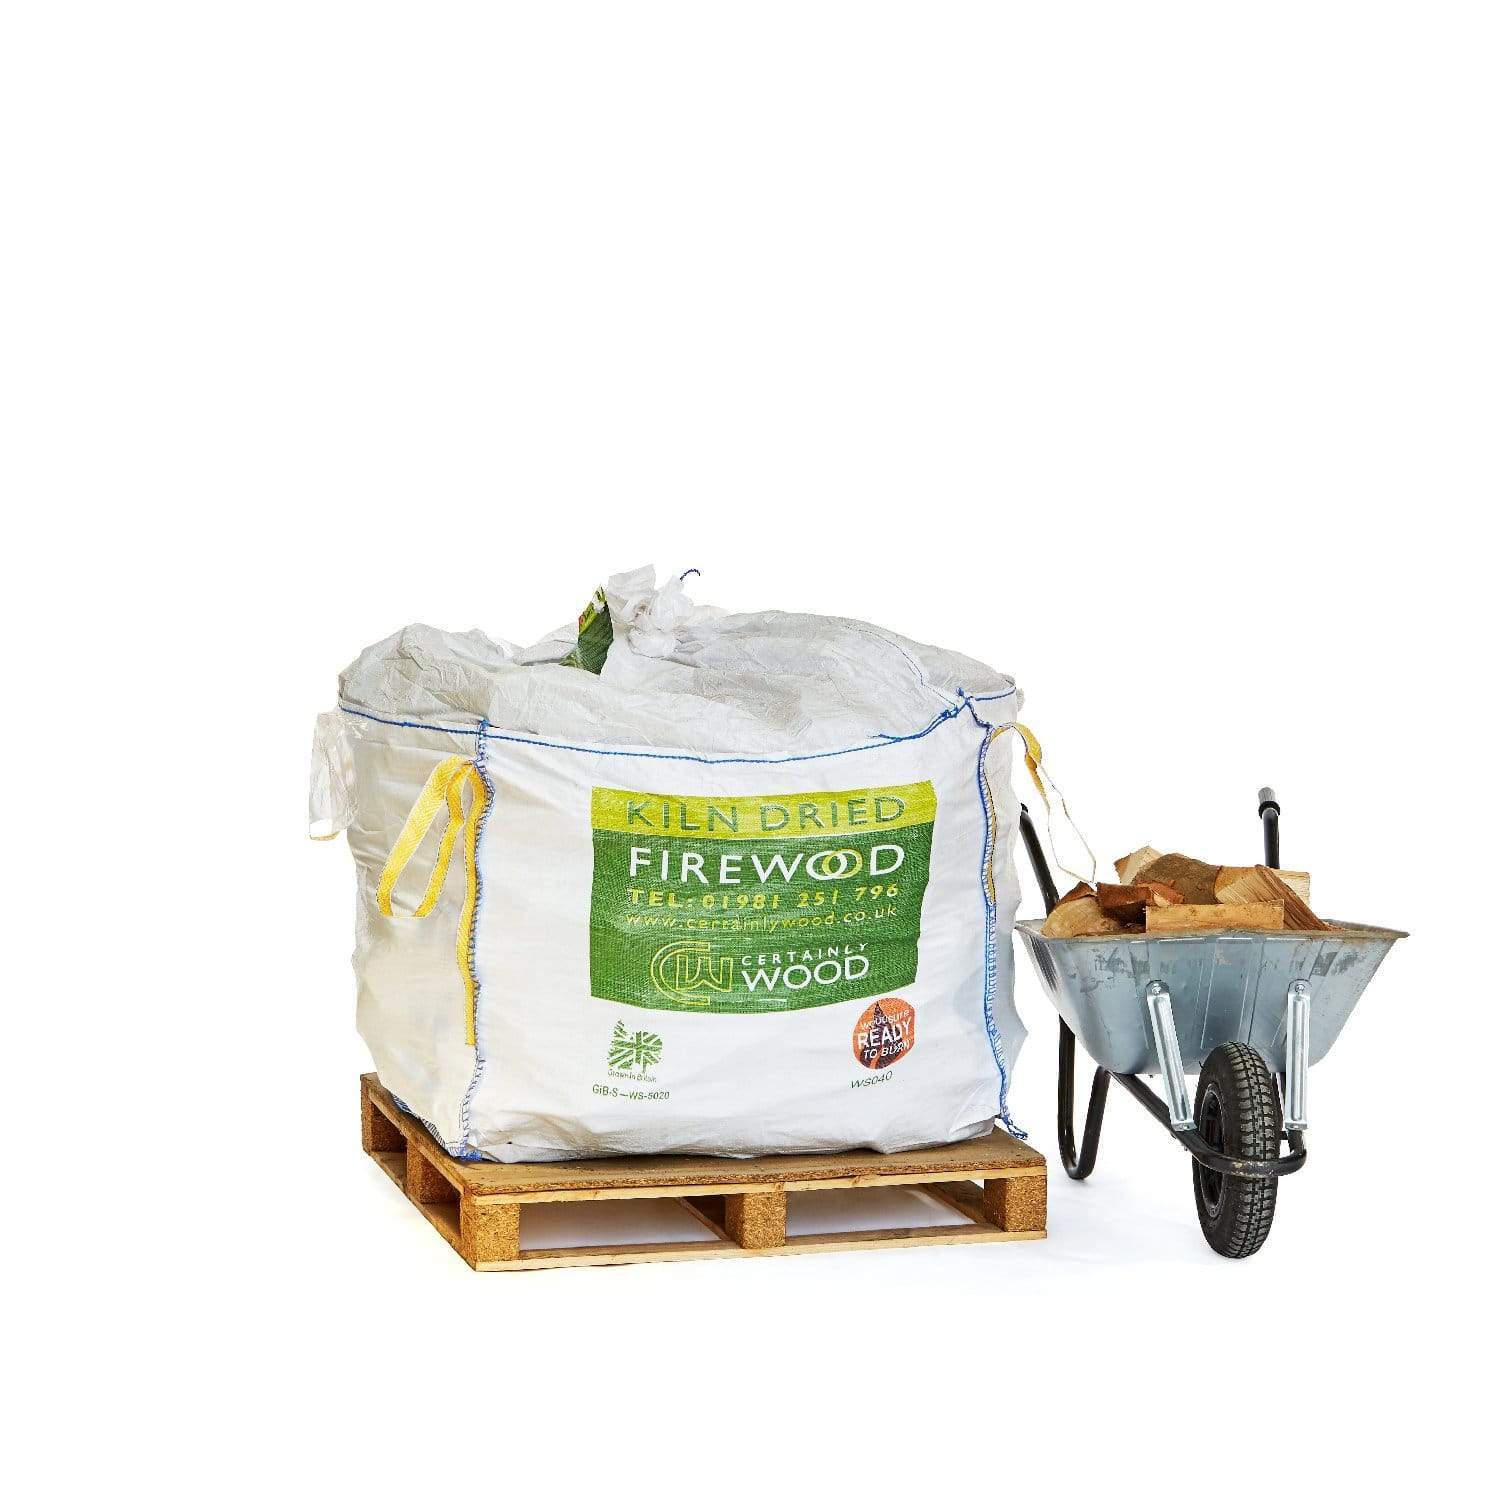 Flaming Firewood kiln dried logs 0.8m3 Bulk Bag For Firepits and Pizza Ovens